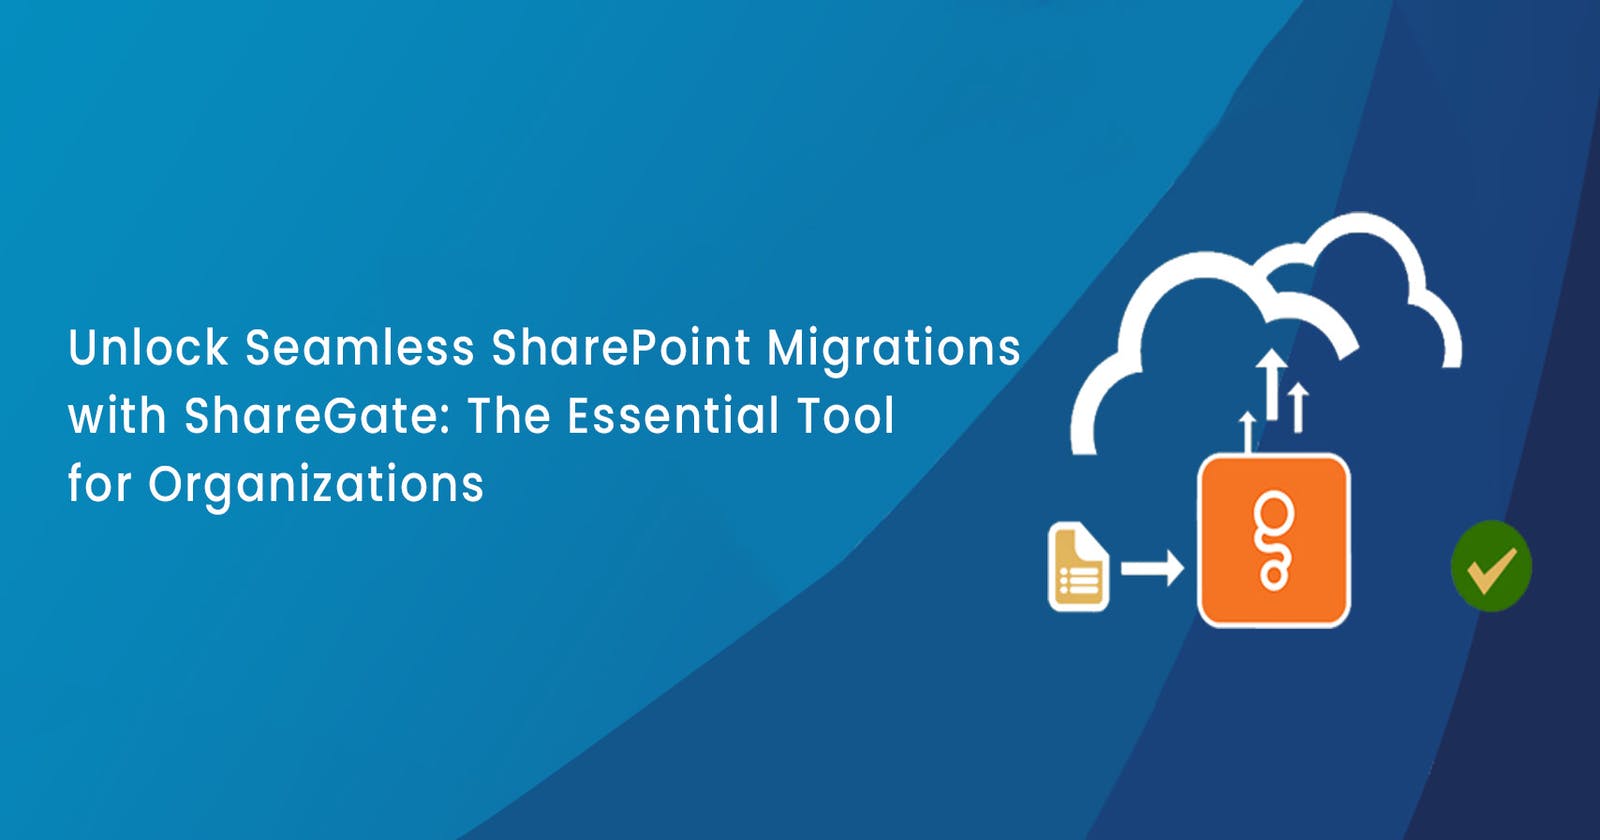 Unlock Seamless SharePoint Migrations with ShareGate: The Essential Tool for Organizations